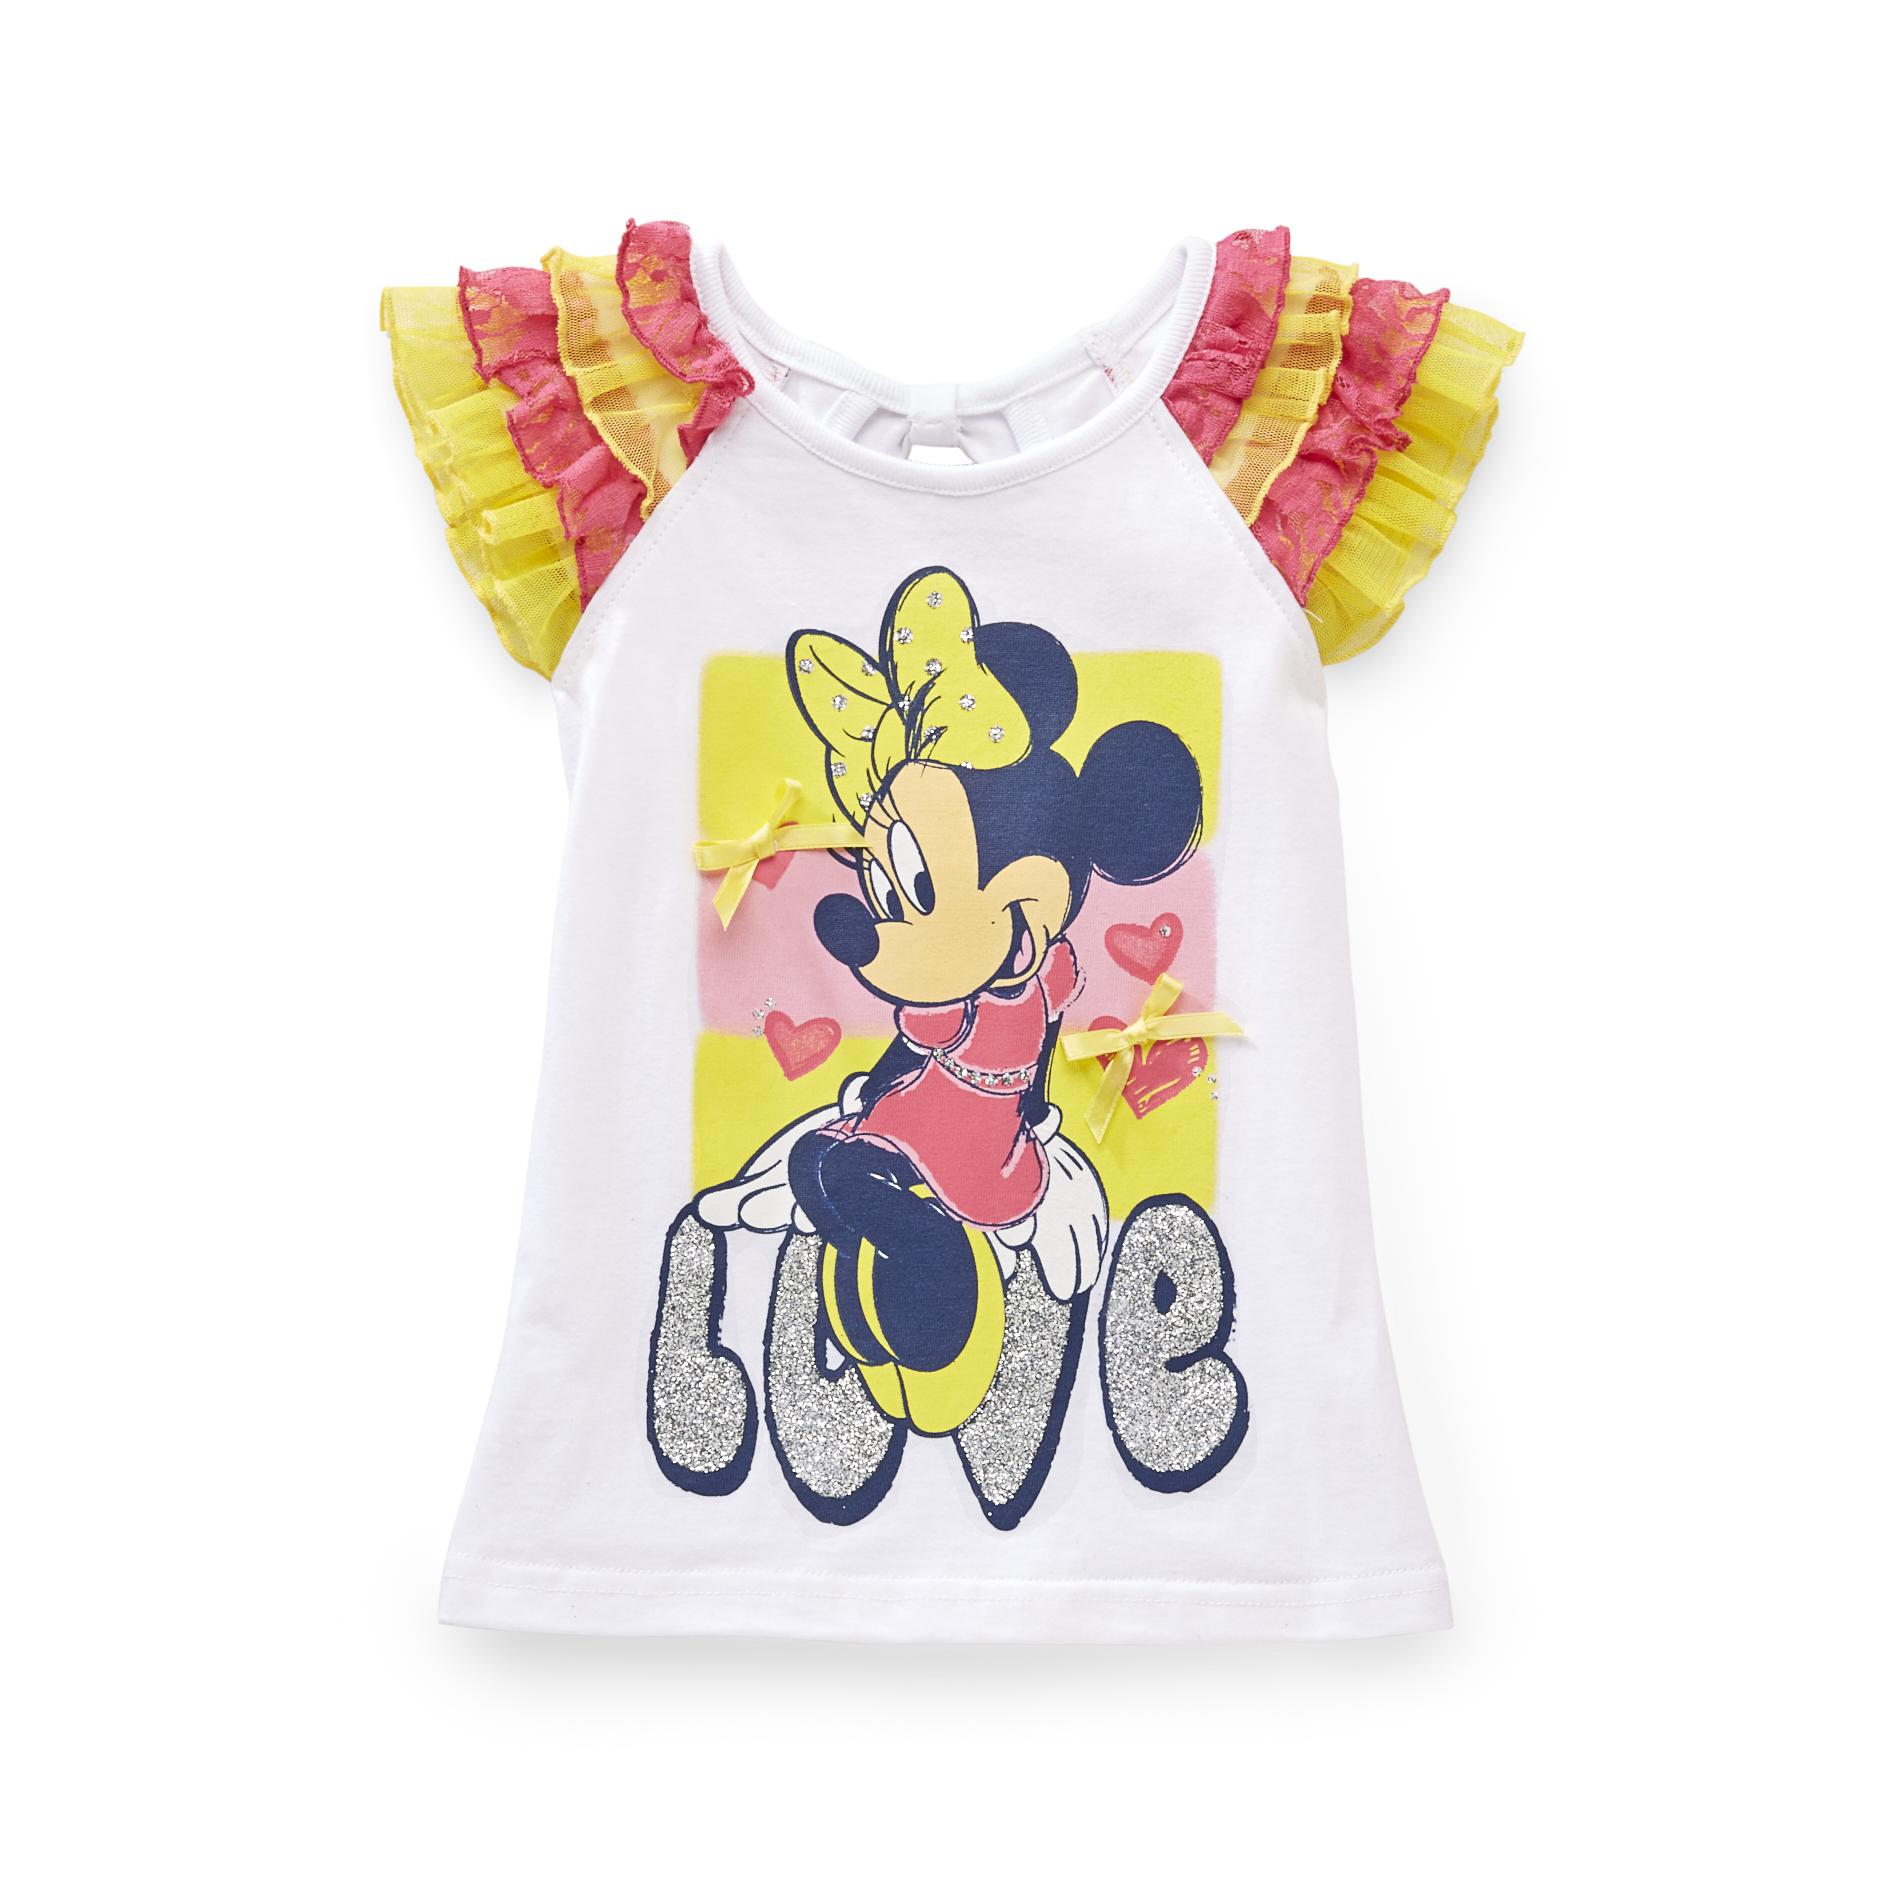 Disney Minnie Mouse Toddler Girl's Glitter Top